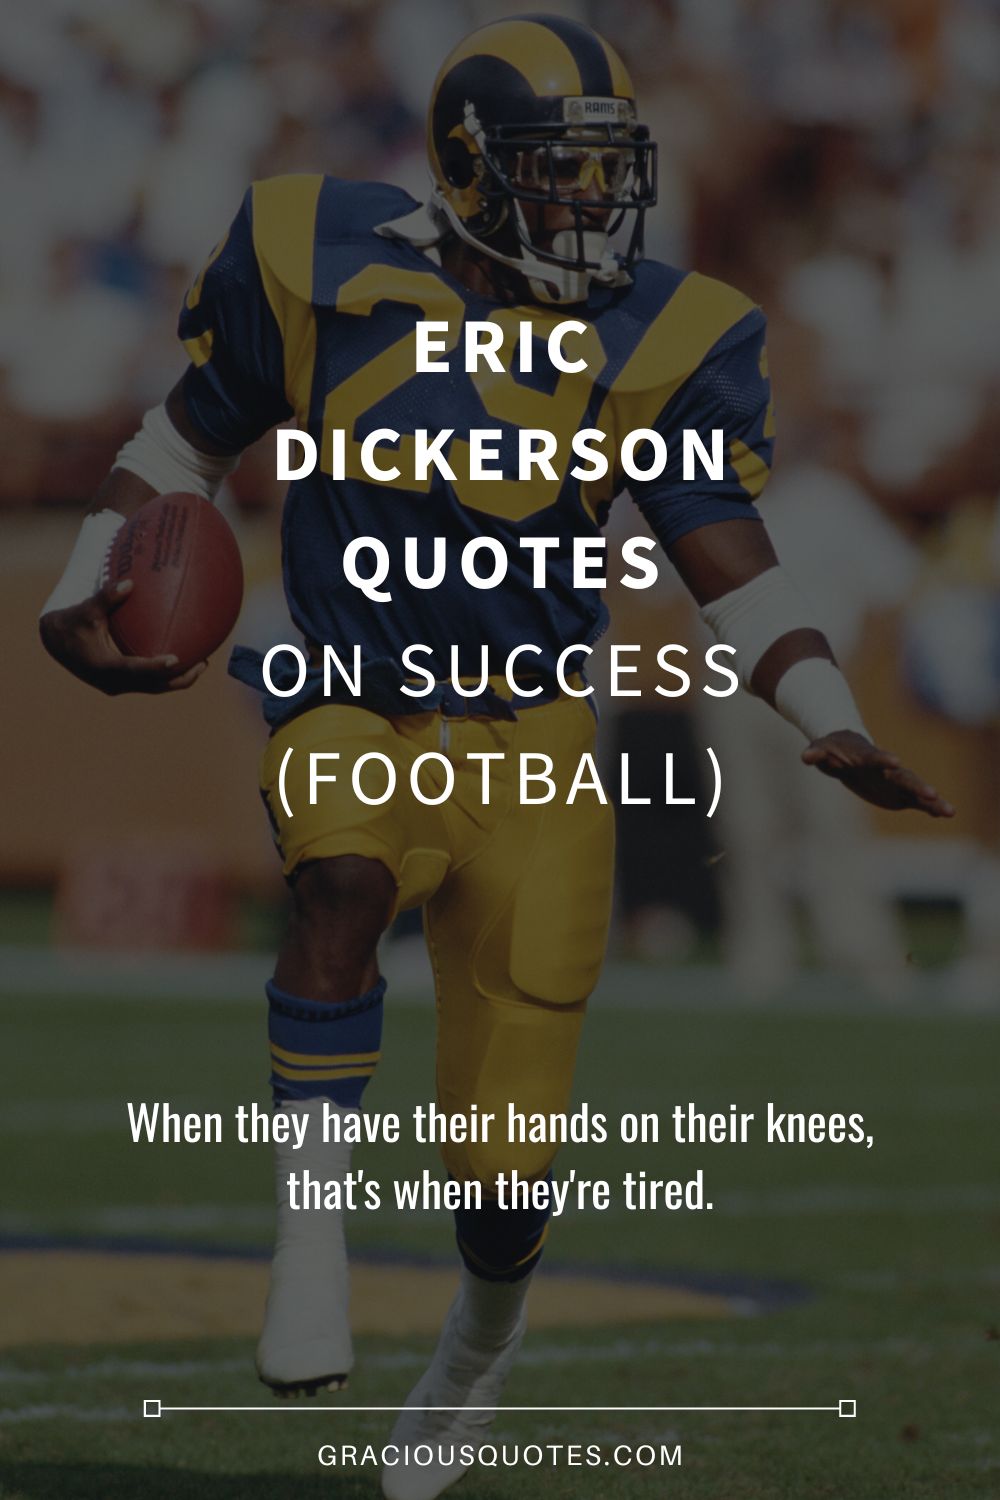 Eric Dickerson Quotes on Success (FOOTBALL) - Gracious Quotes